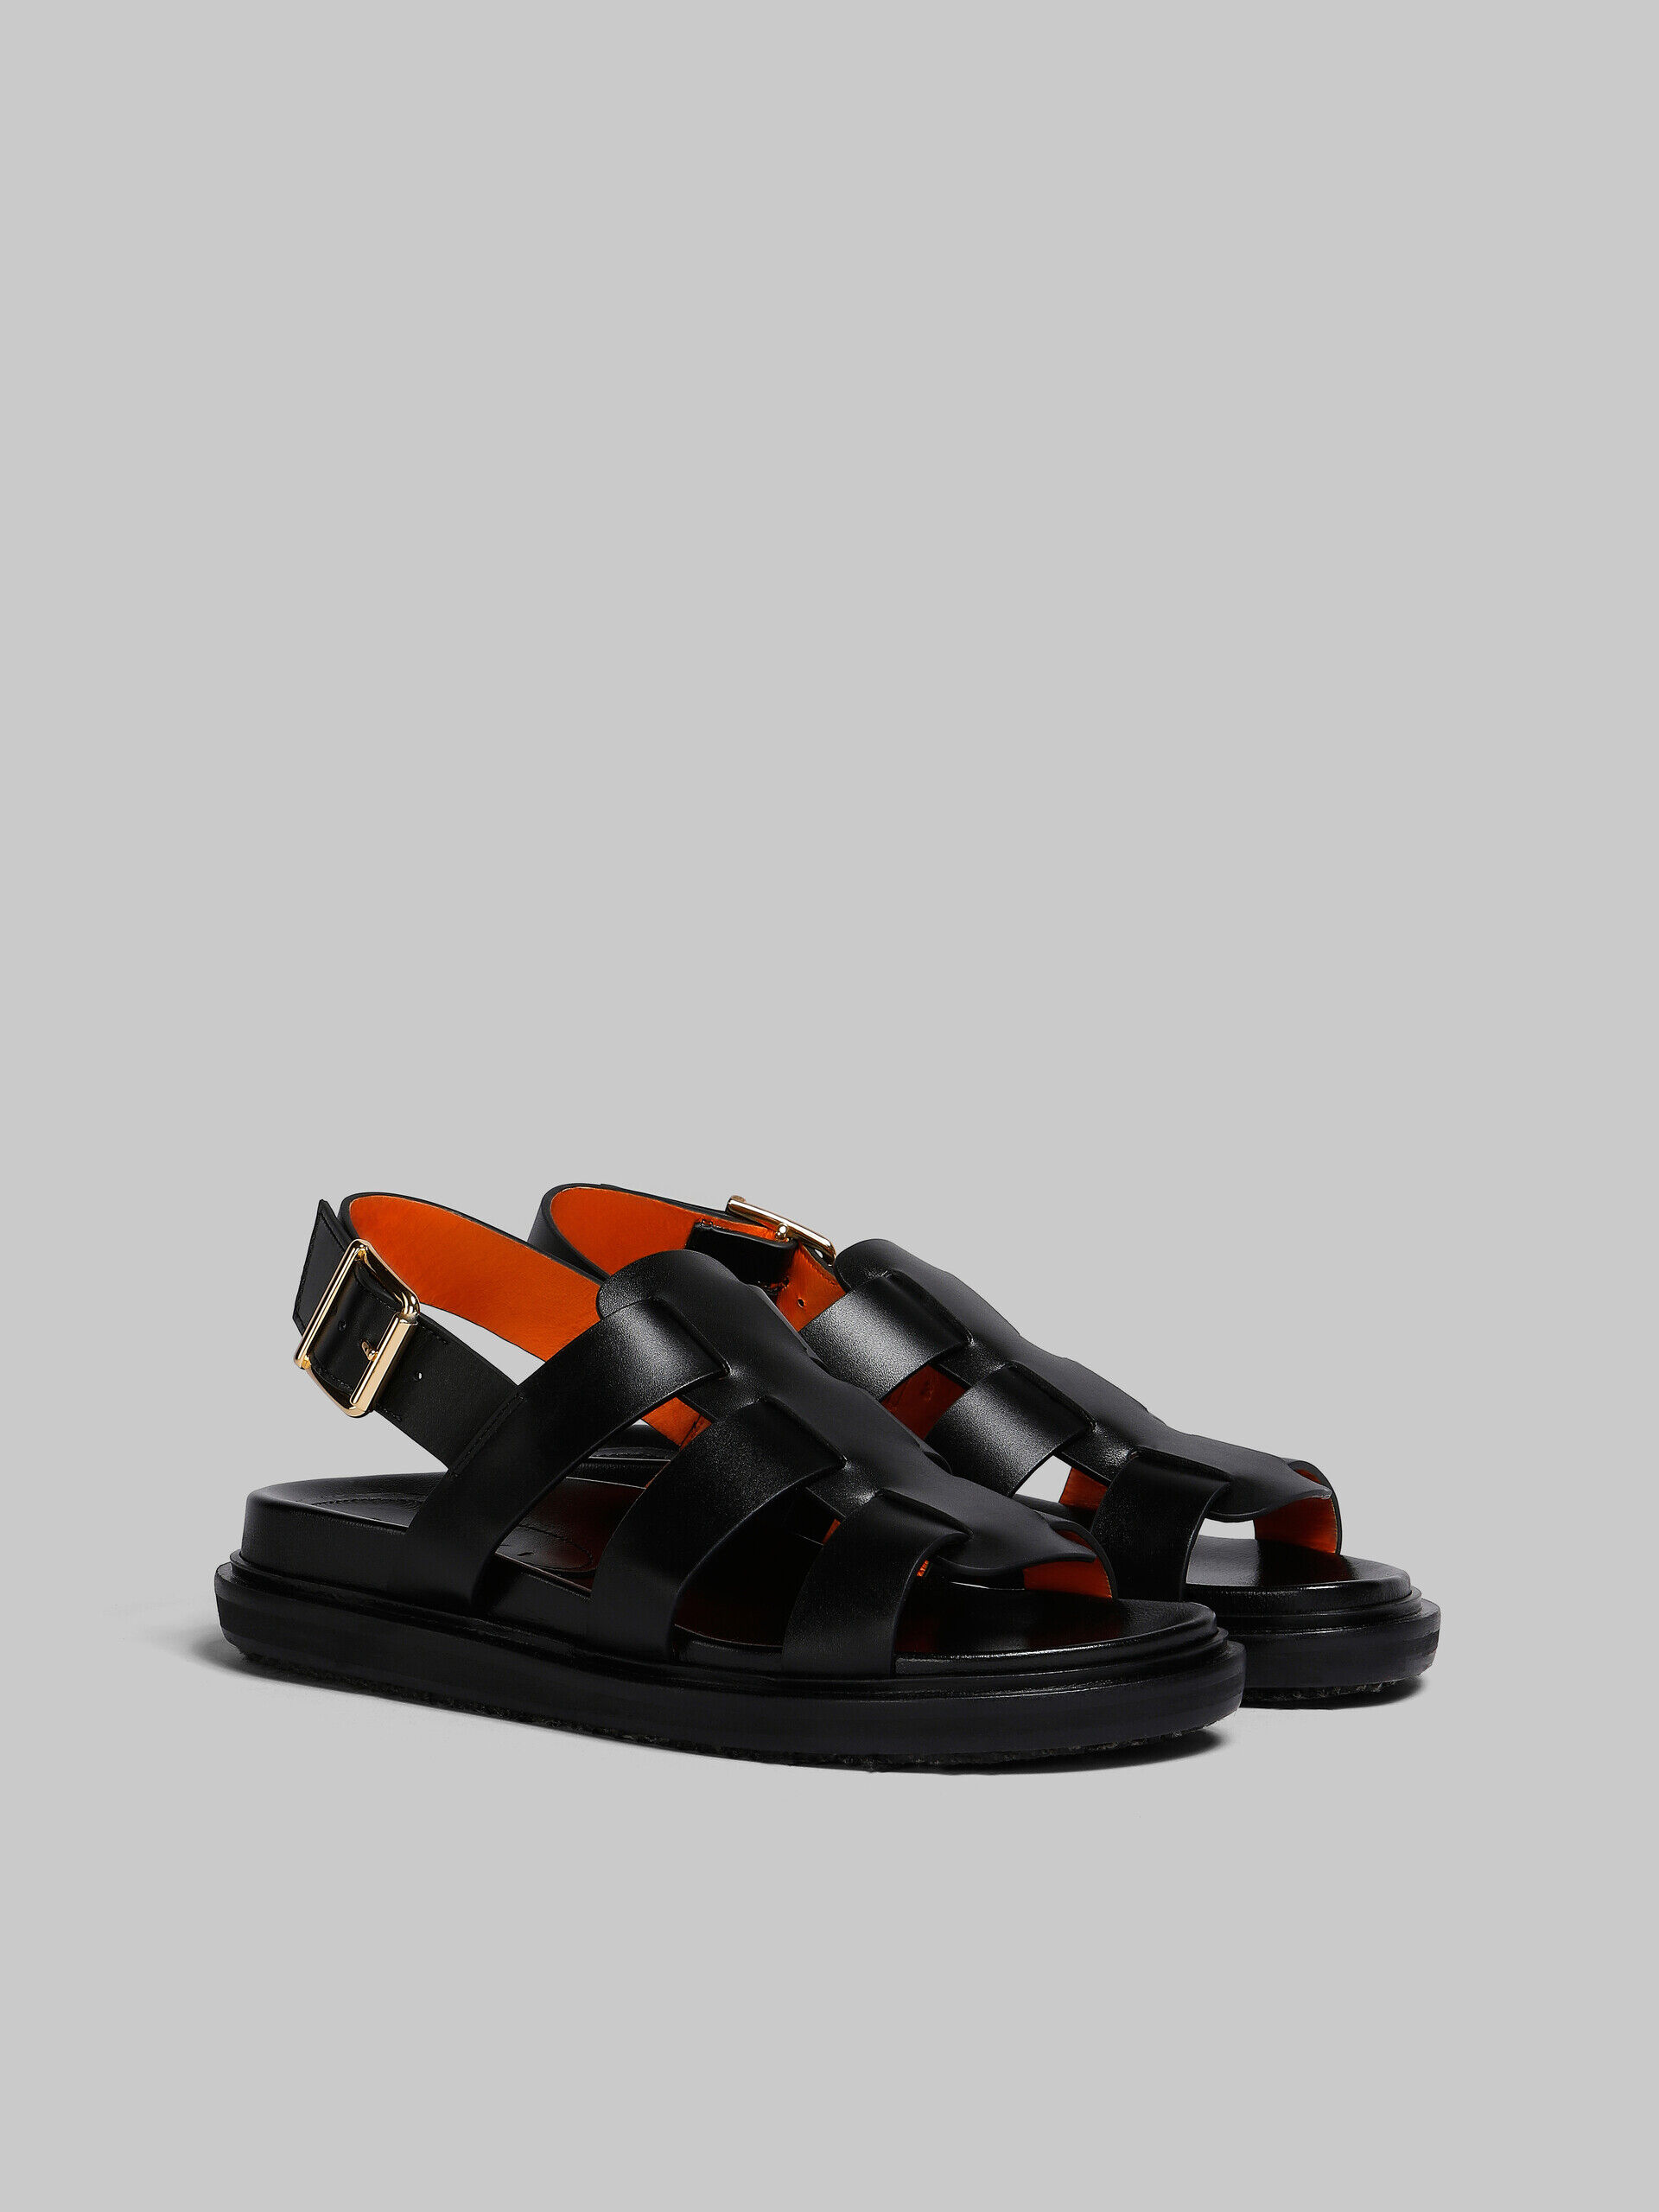 Sandals Marni - Cross sandals in black and brown - FBMS005201P3614ZI950